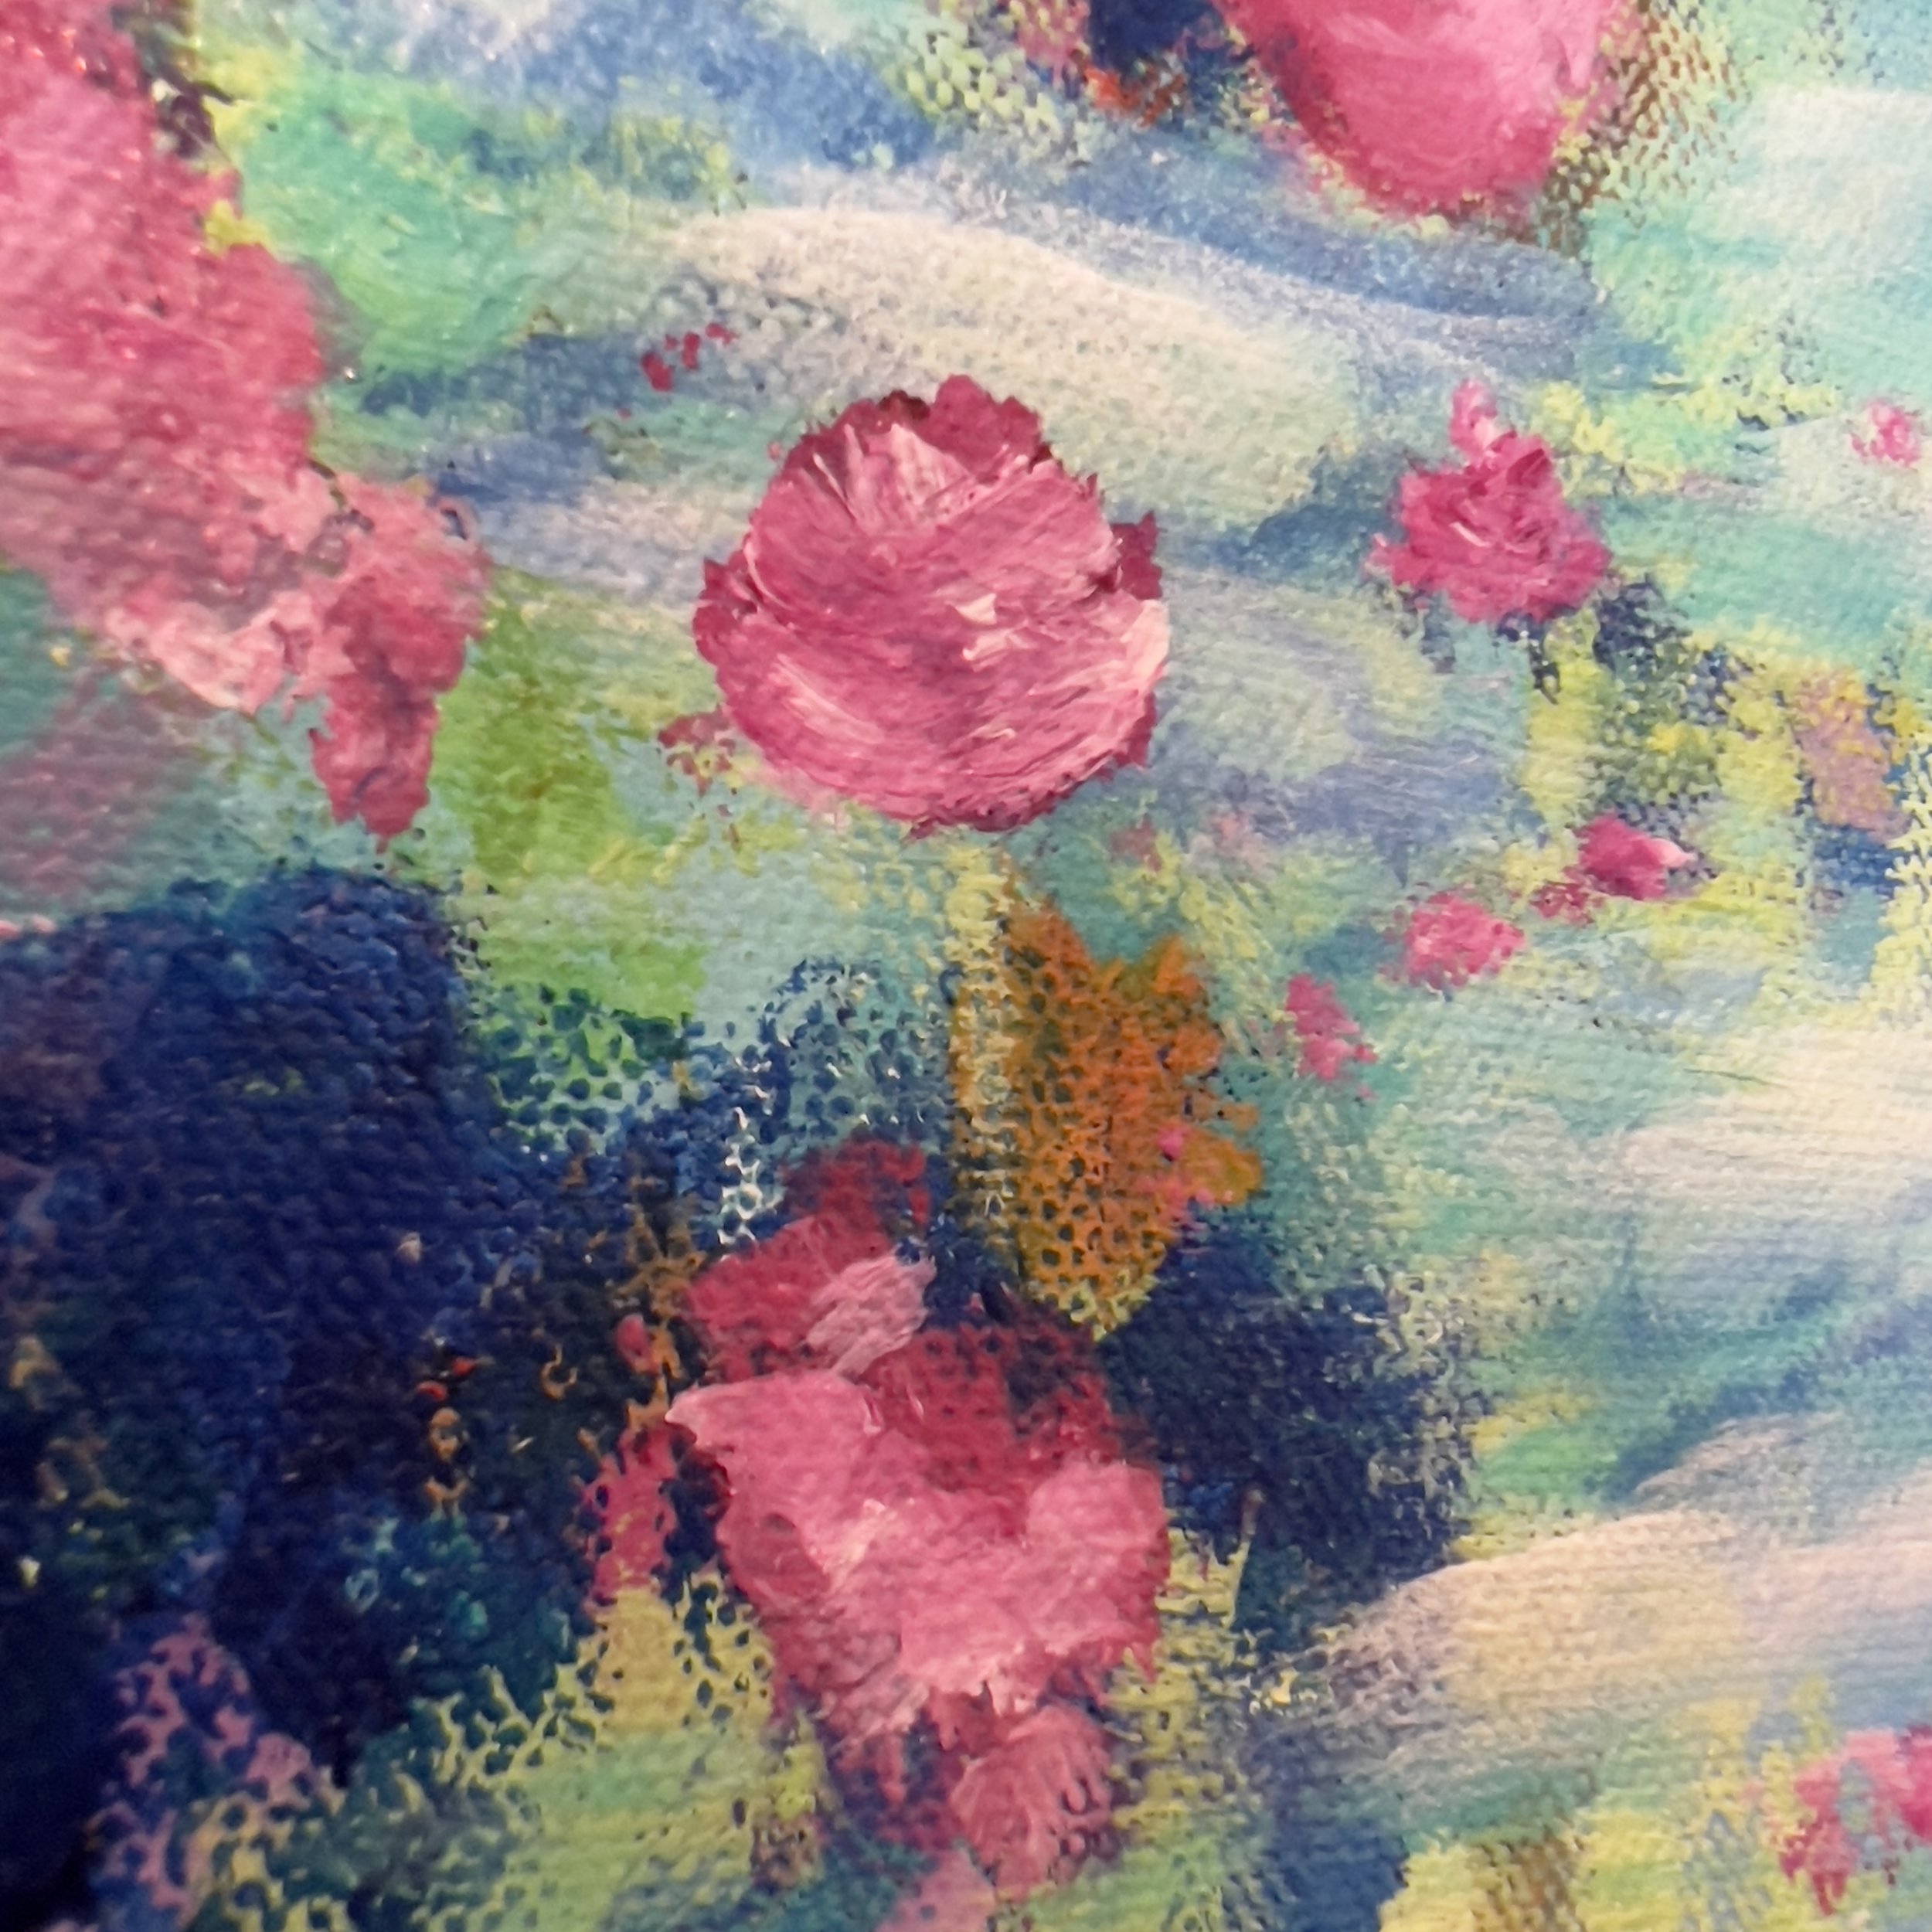 Flower Spray Puff Painting by Distinctive Abstracts - Pixels